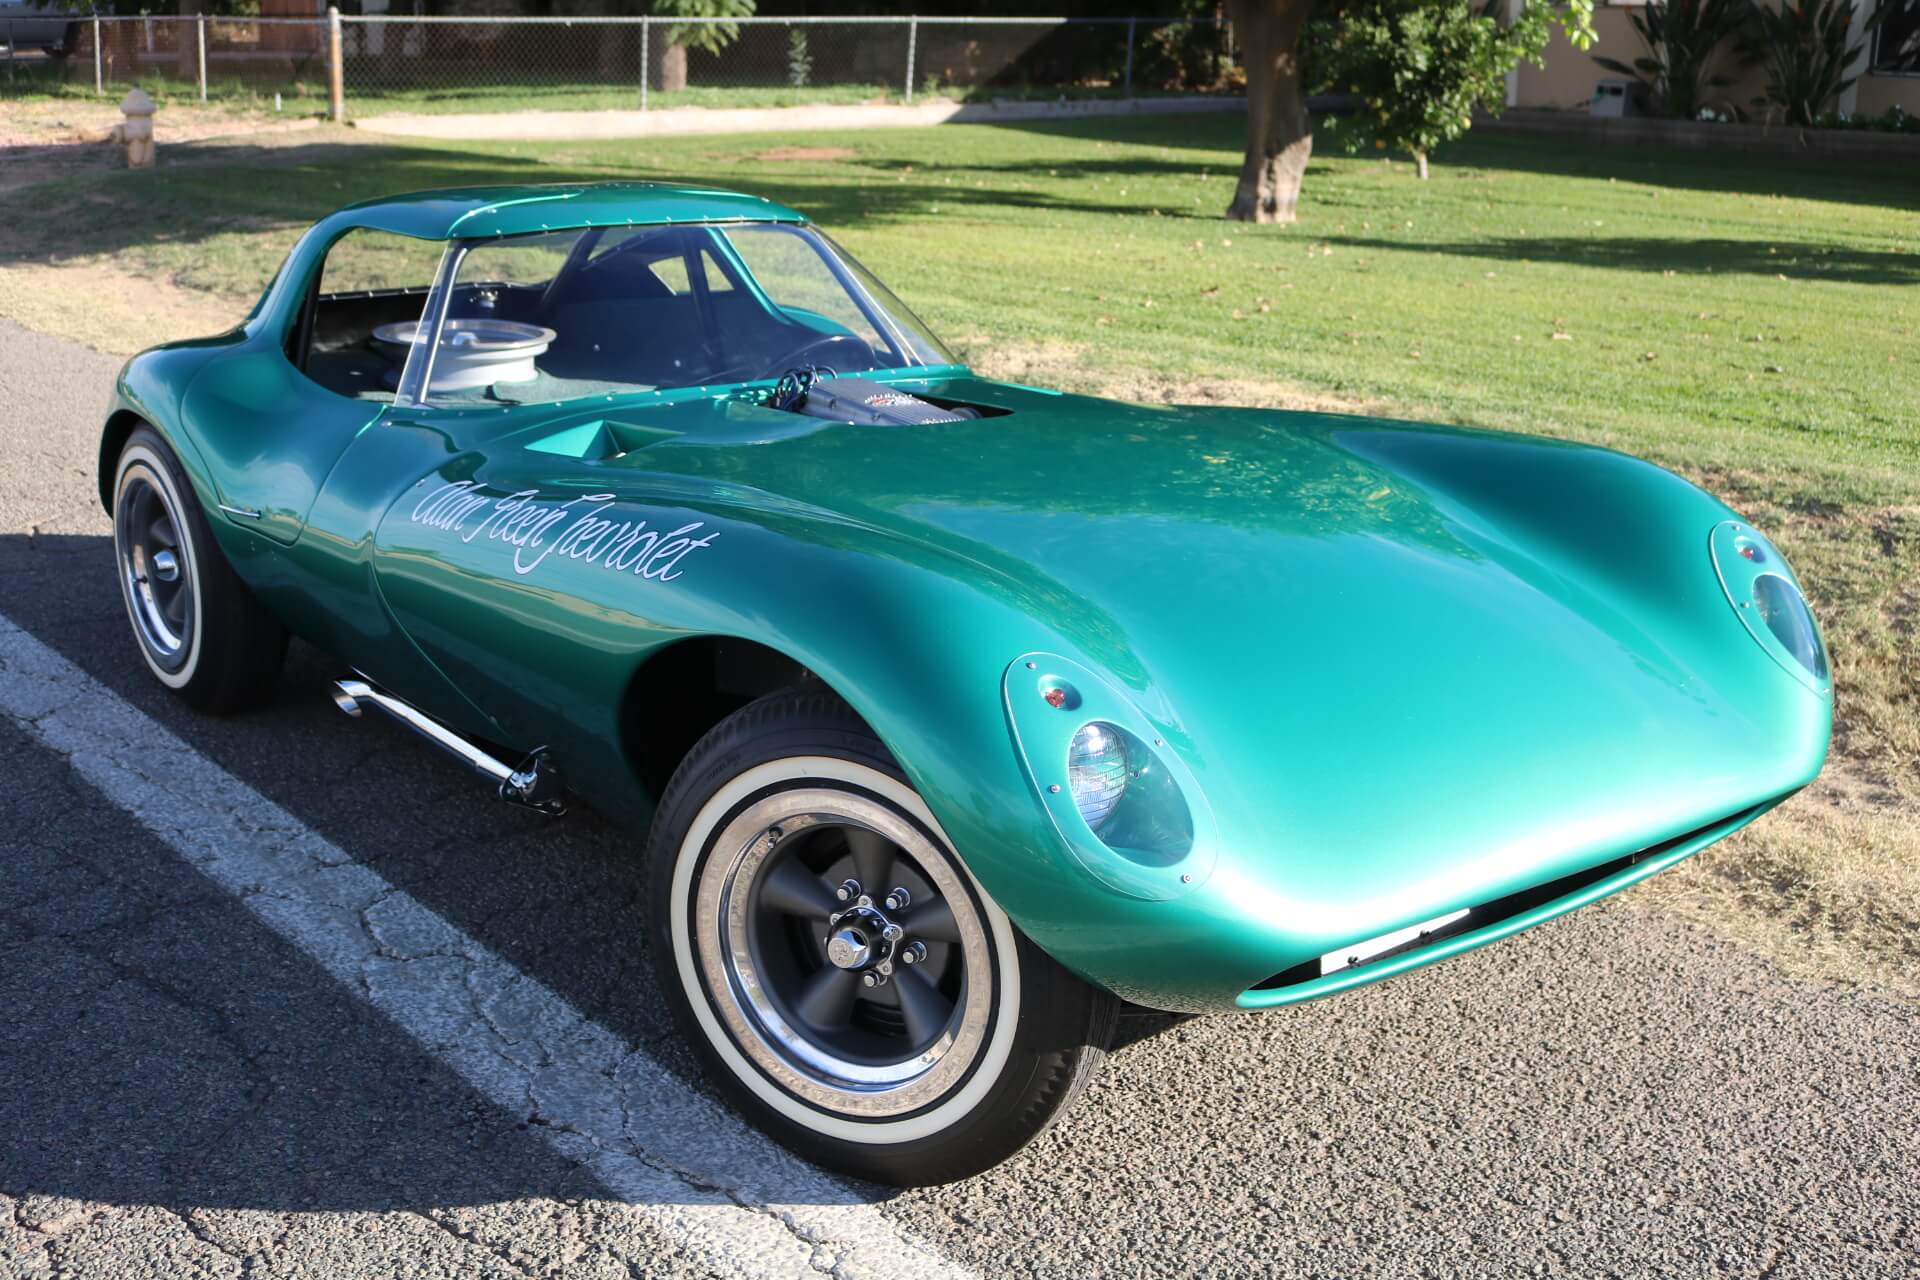 Rare Cheetah sports car sold for record price